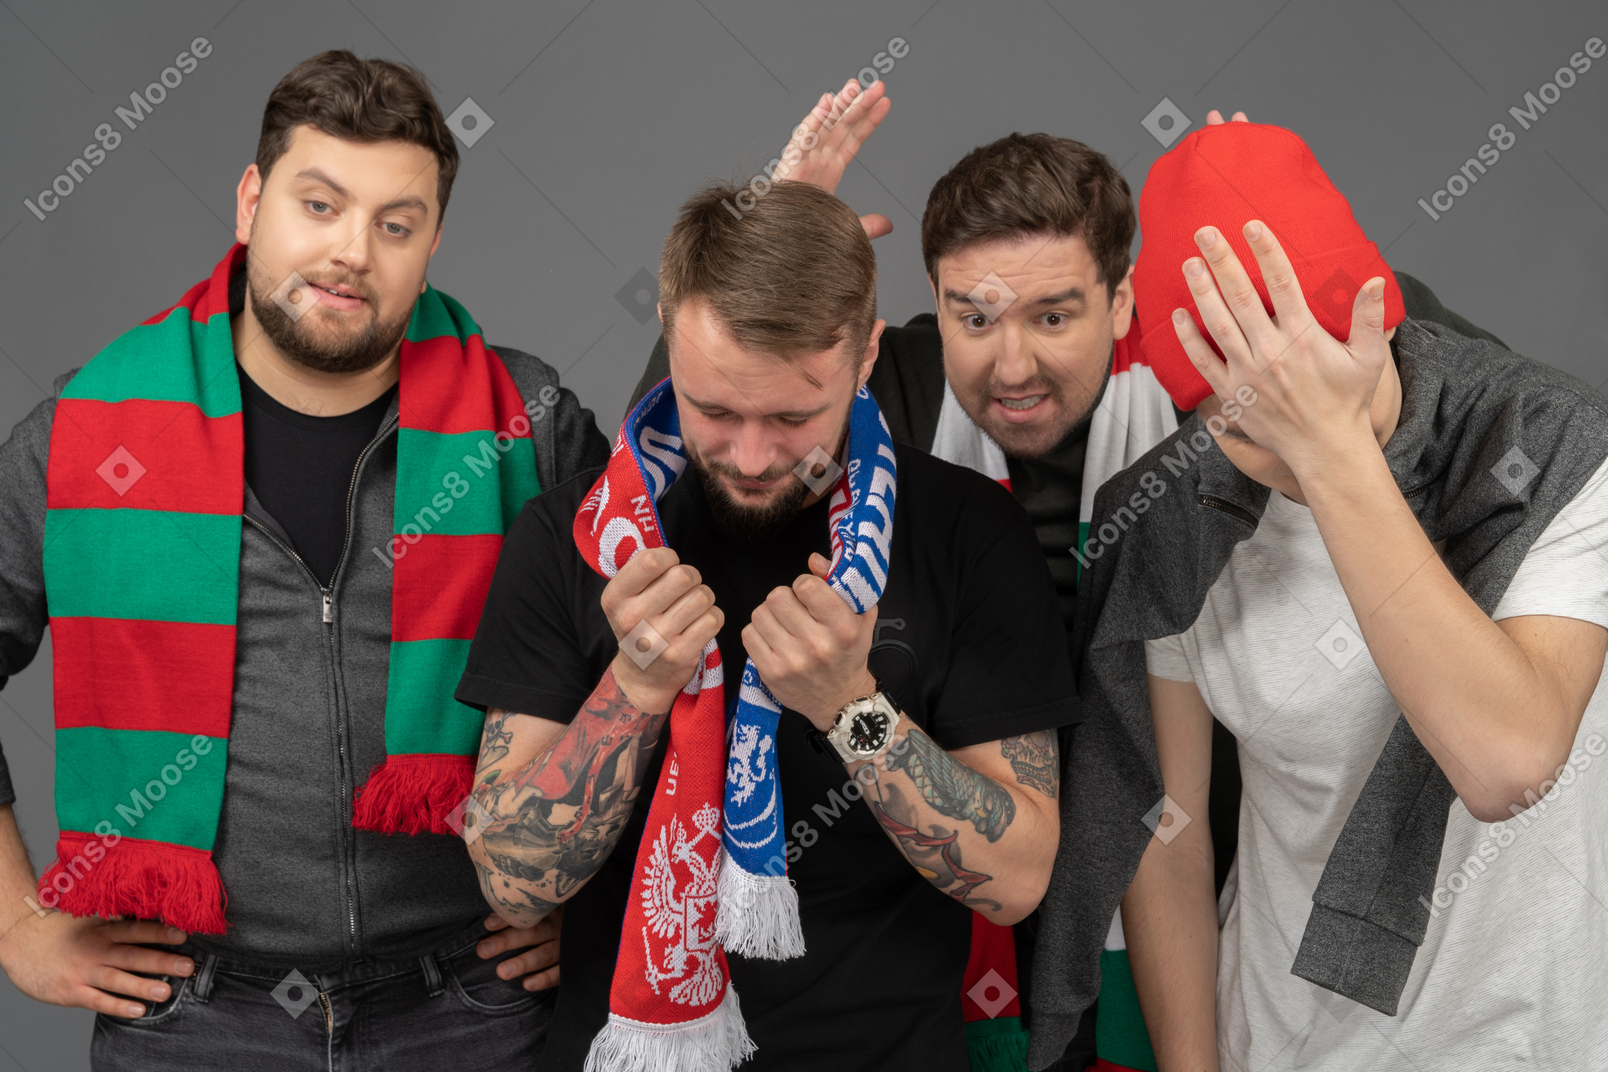 Close-up of four upset male football fans